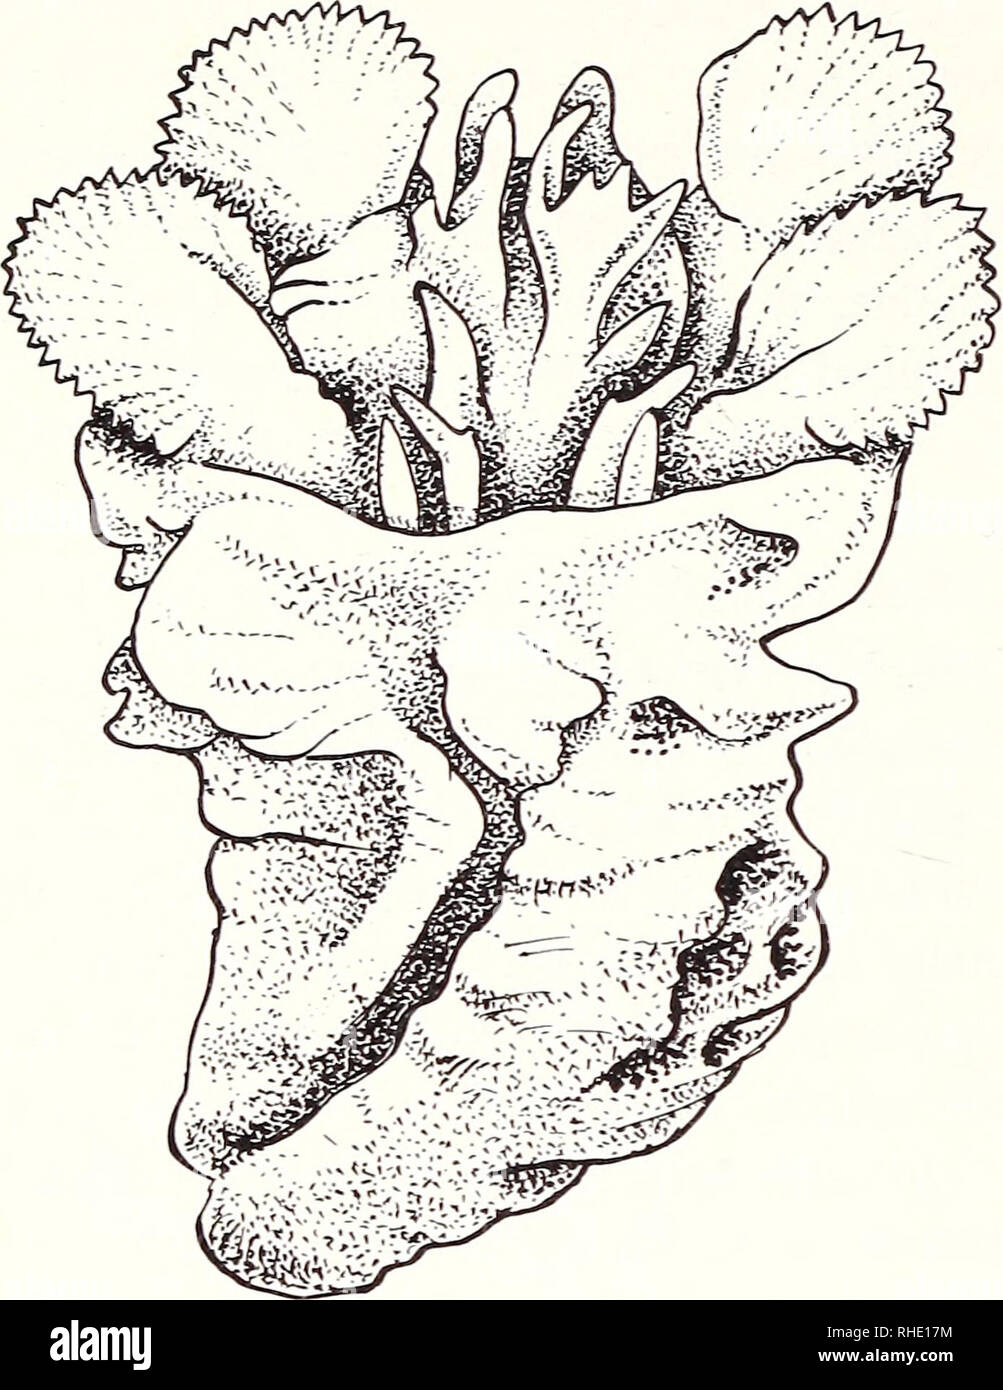 . Bonner zoologische Monographien. Zoology. 22. Fig. 7. Hemipenis of C. oweni, sulcal view. rated. At the base of each sulcal rotula is a large fleshy papilla; medially and somewhat distally of these papillae another pair of isolated papillae is present. Chamaeleo montium Buchholz, 1874 (Fig. 8) ZFMK 8844, 9067, 9069, 15287 and 15288 Buea, Mt. Cameroon, Cameroon Hemipenes stoutly built and truncated, pedicel one third of hemipenislength. The trun- cus is coarsely calyculate, the well developed sulcal lips and sulcus spermaticus without ornamentation. Apex with two pairs of small denticulated r Stock Photo